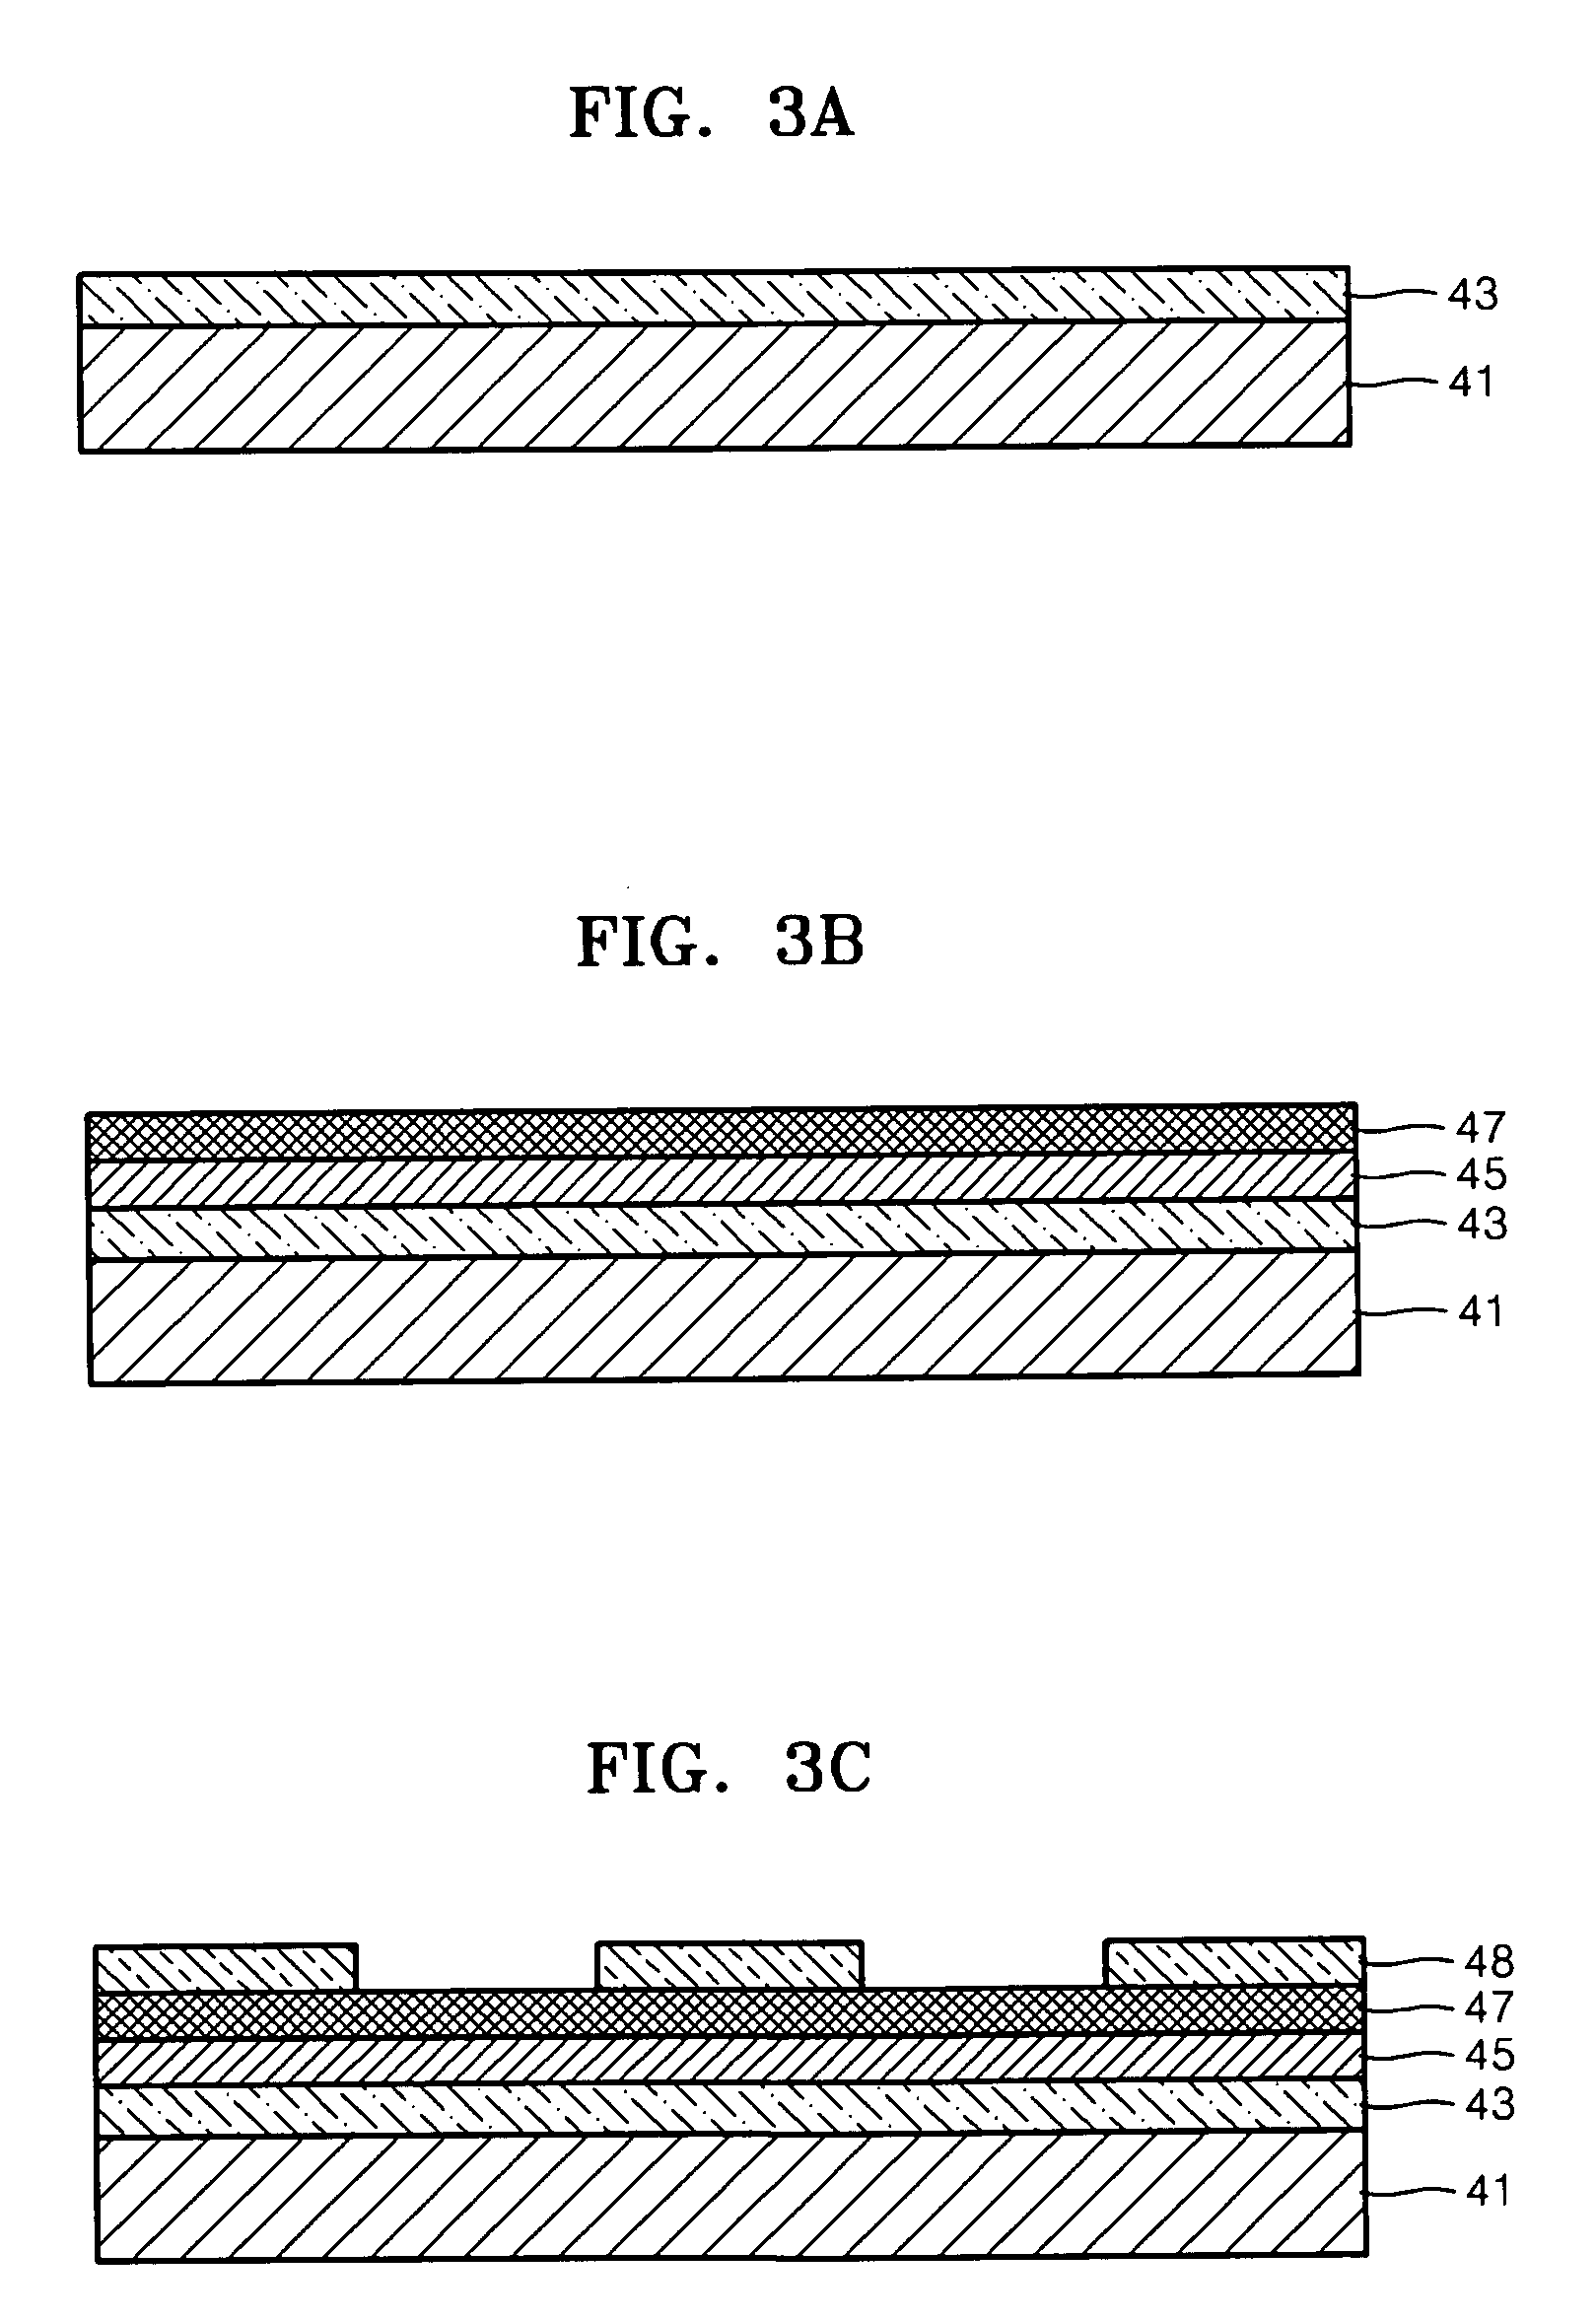 Magnetic tracks, information storage devices using magnetic domain wall movement, and methods of manufacturing the same